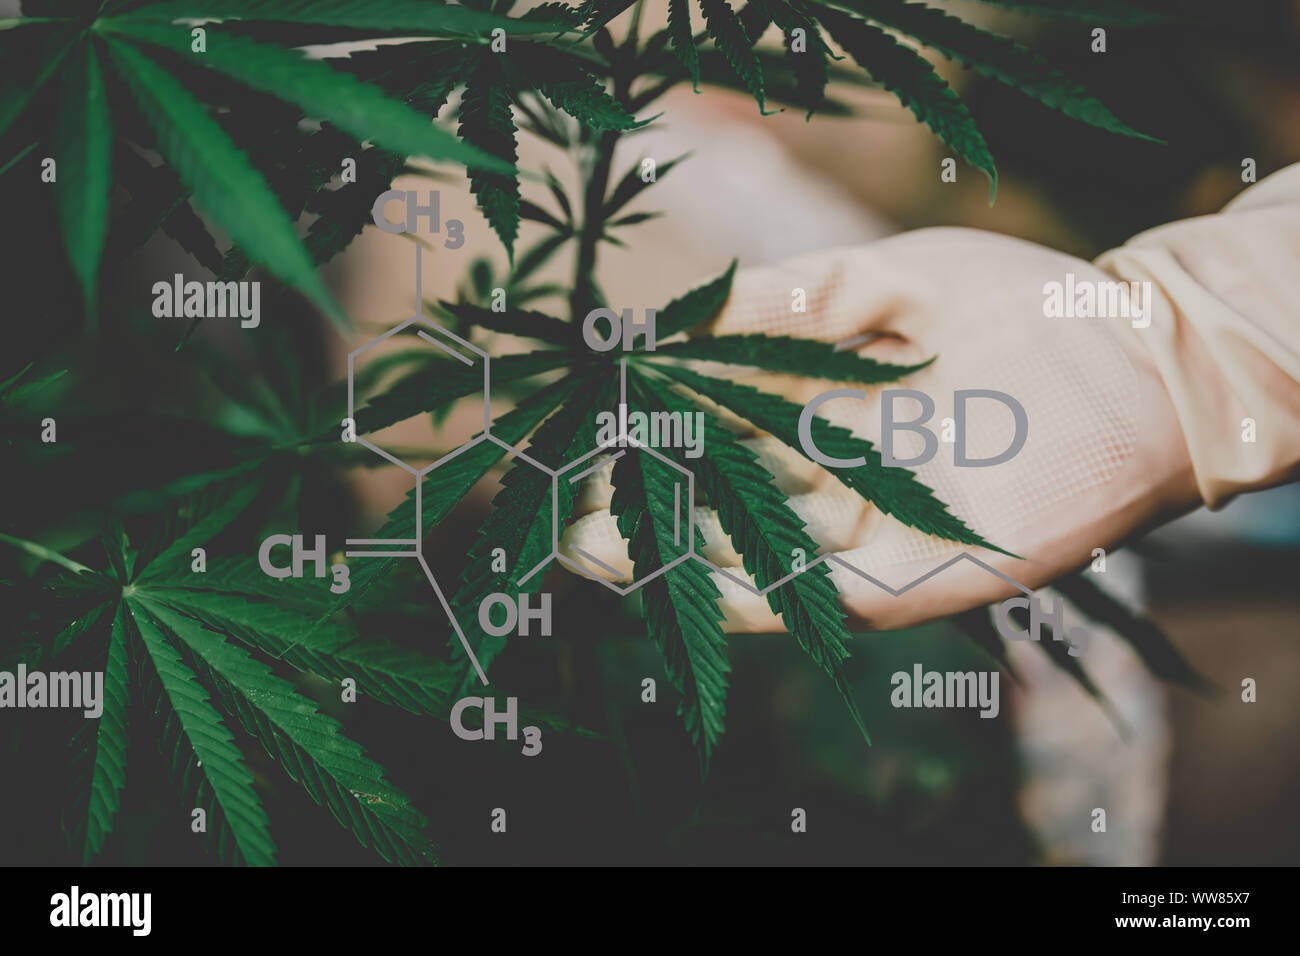 Formulation of the CBD industry, cannabis industry, growth of ca Stock Photo